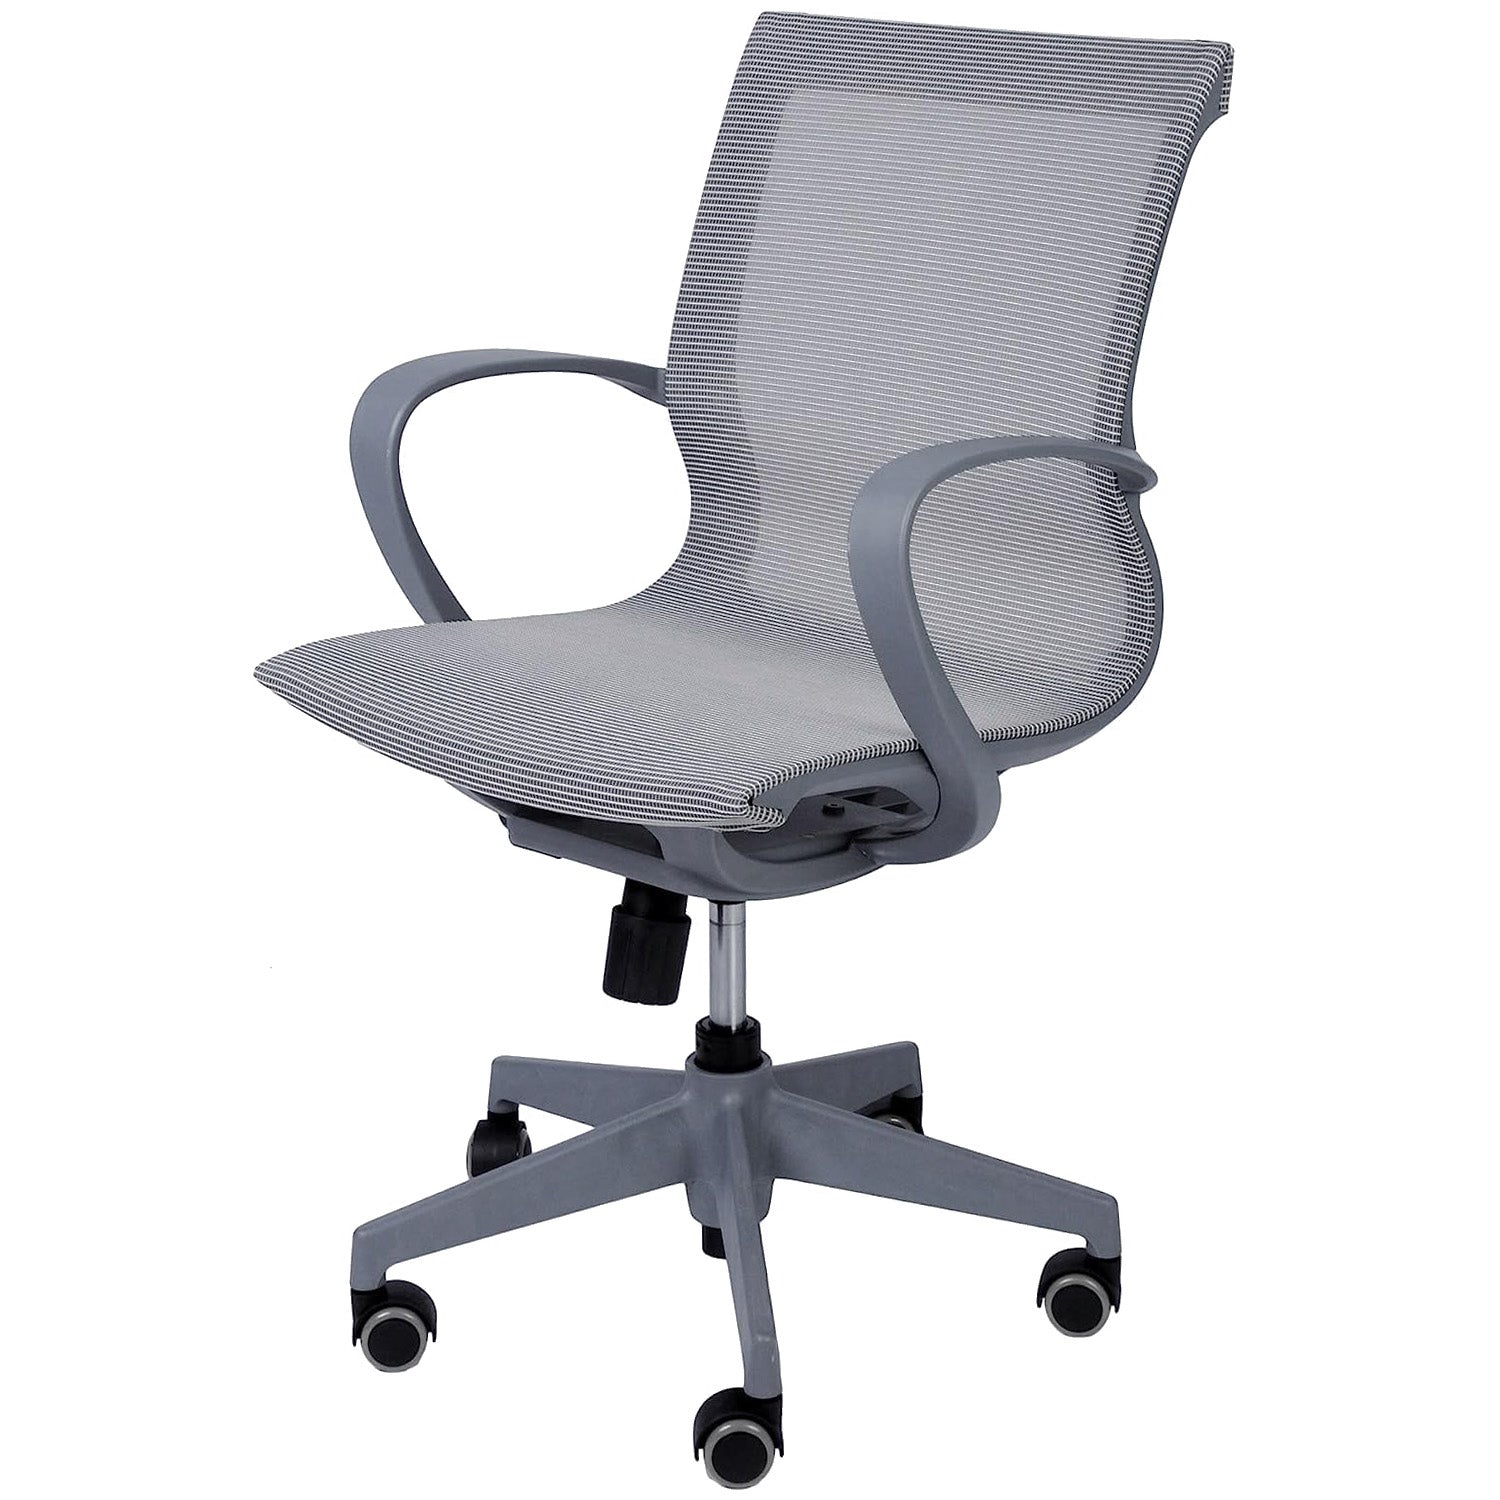 LUCKYERMORE Home Office Chair Mesh Chair Breathable Back Seat Height Adjustable, Gray